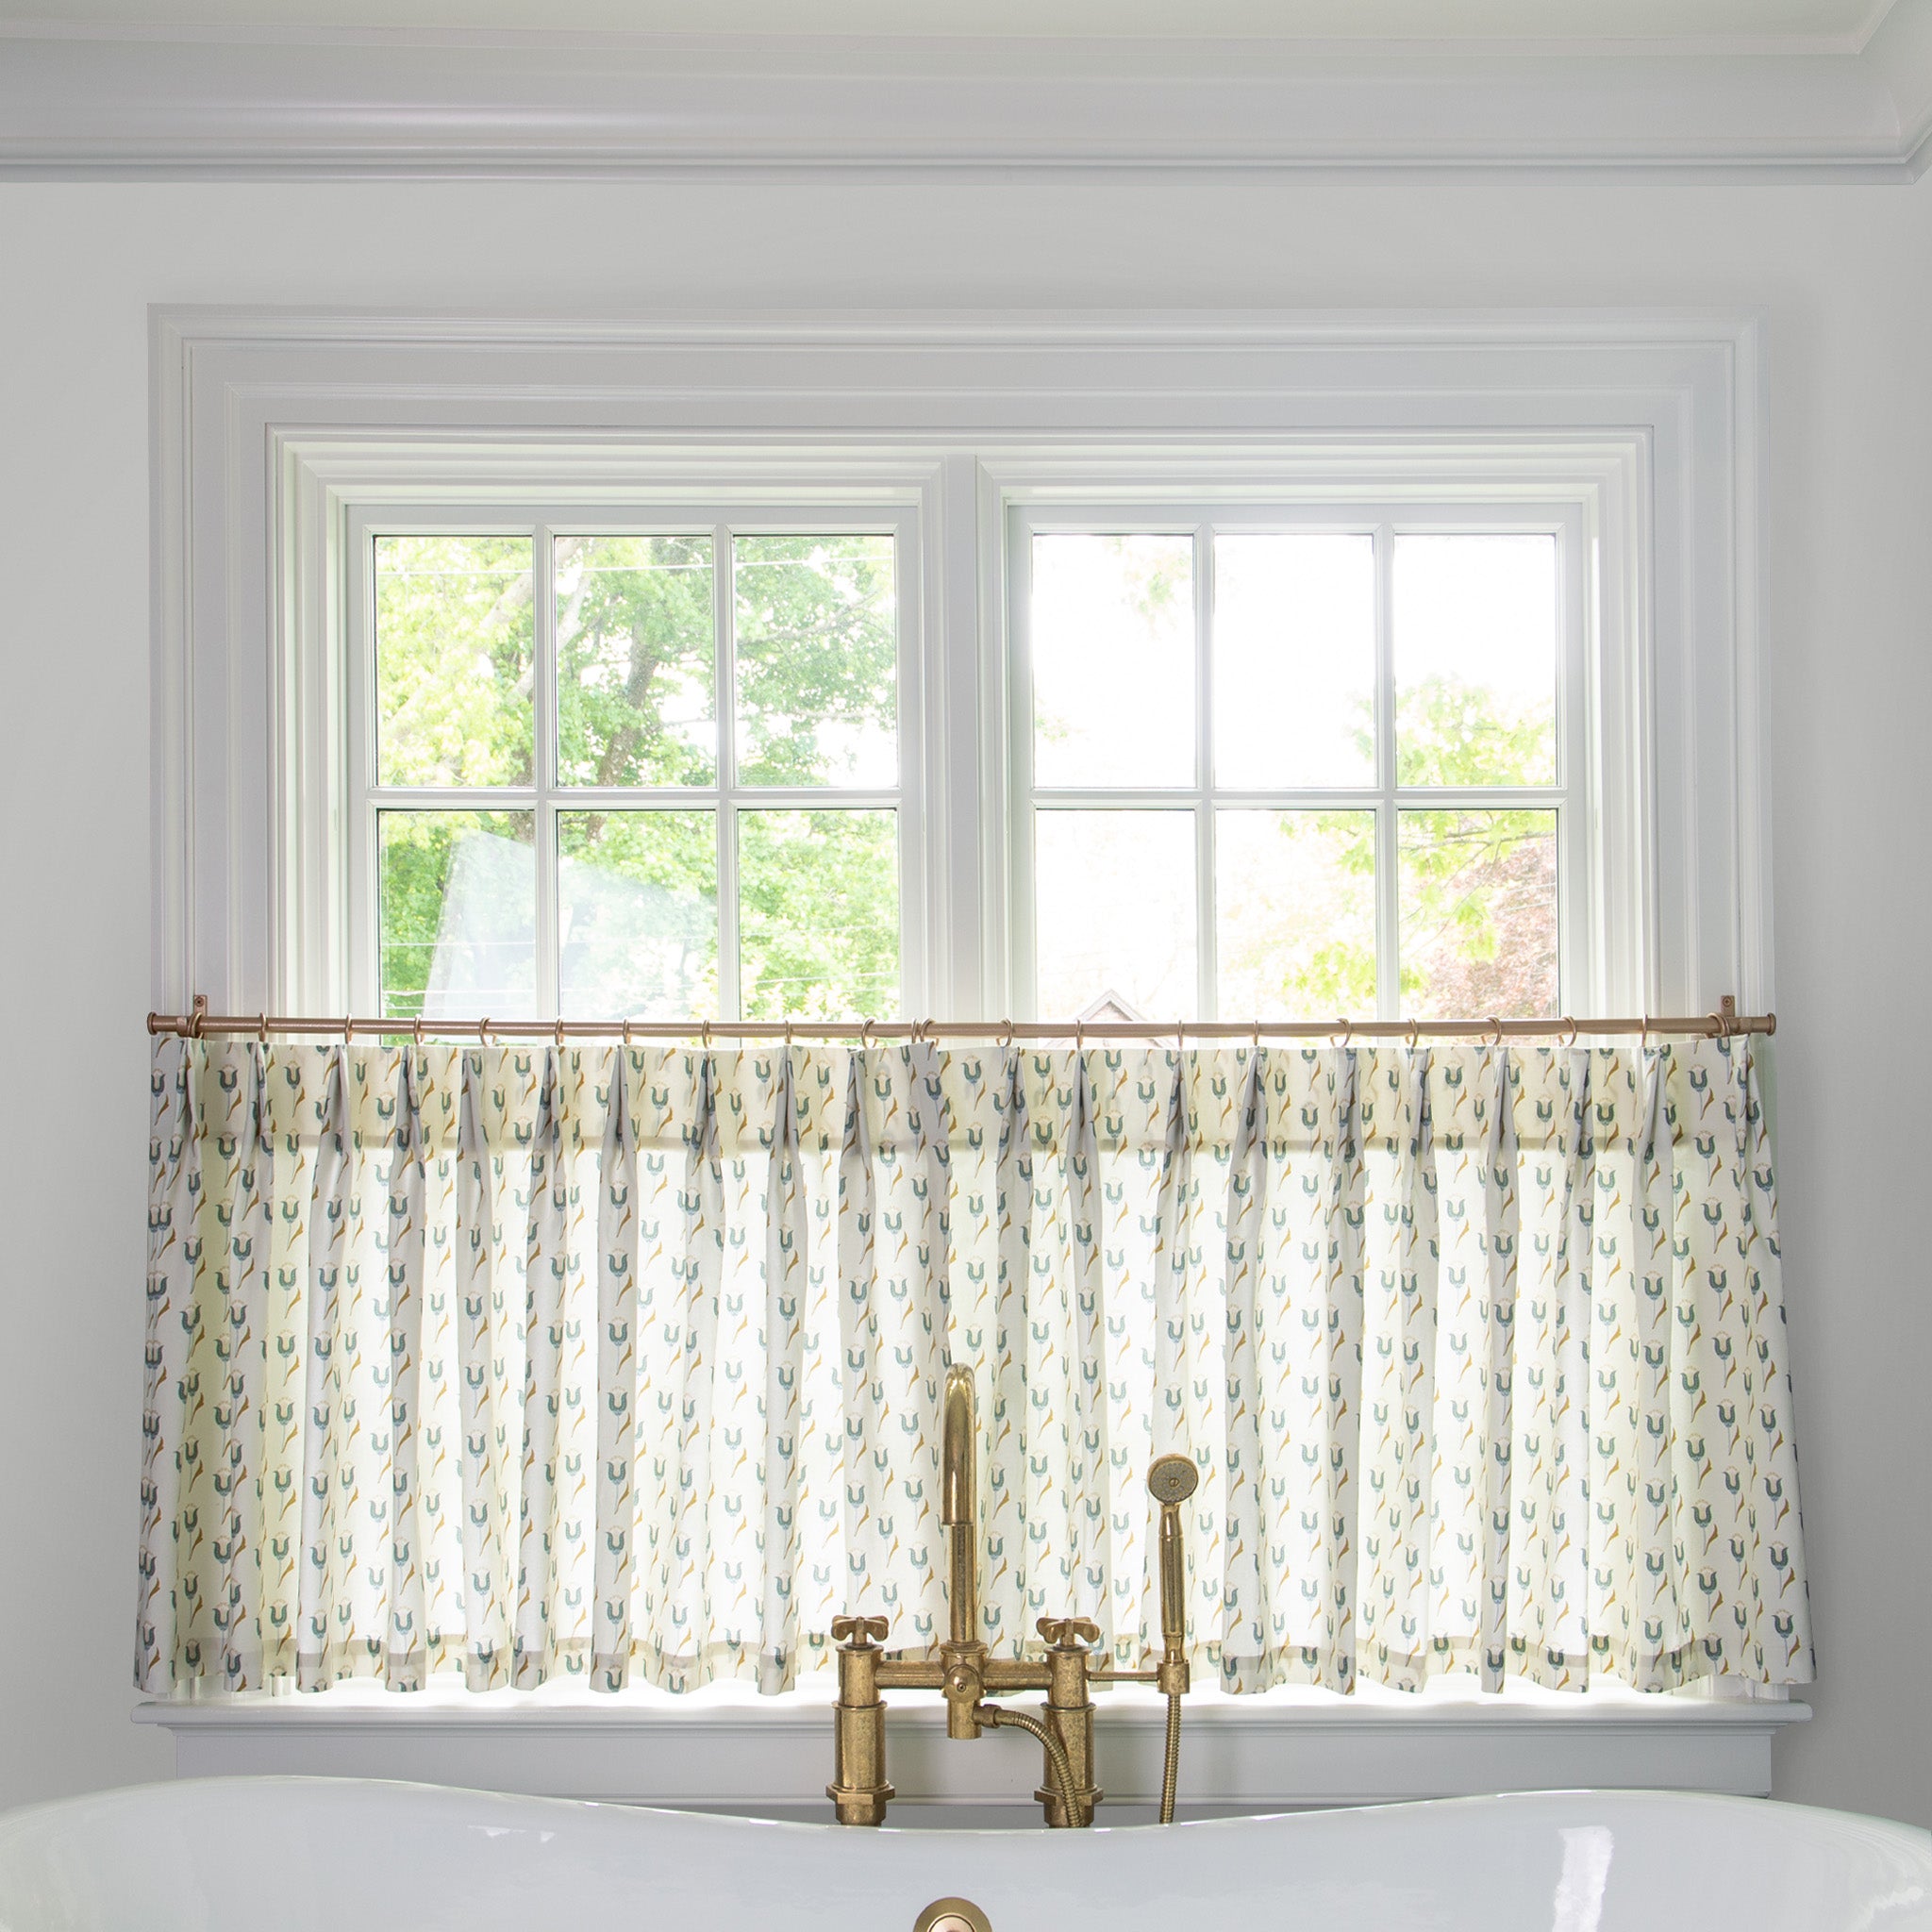 abstract floral blue printed cotton fabric curtains on a metal rod in front of an illuminated window in a bathroom